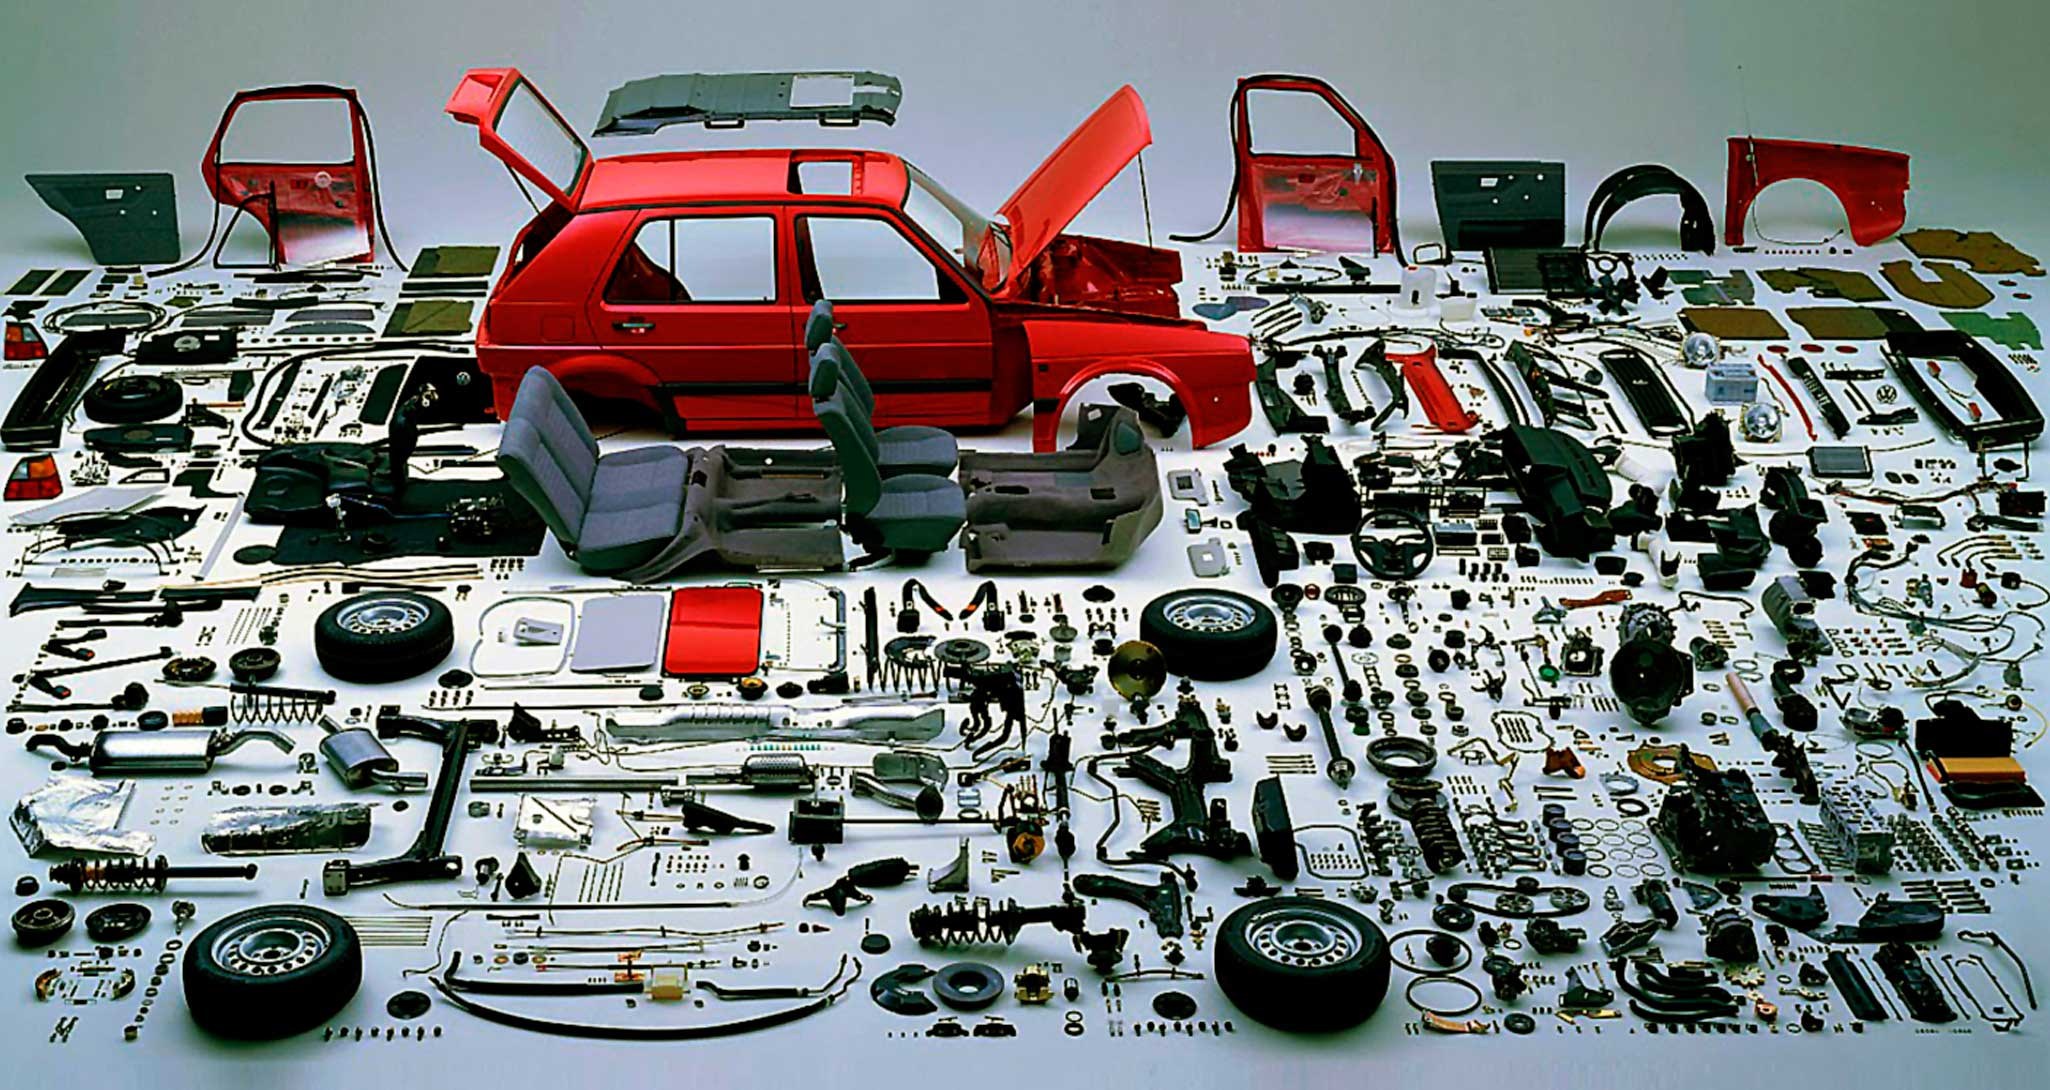 OEM, OES and Aftermarket | Car Spare Parts Explained